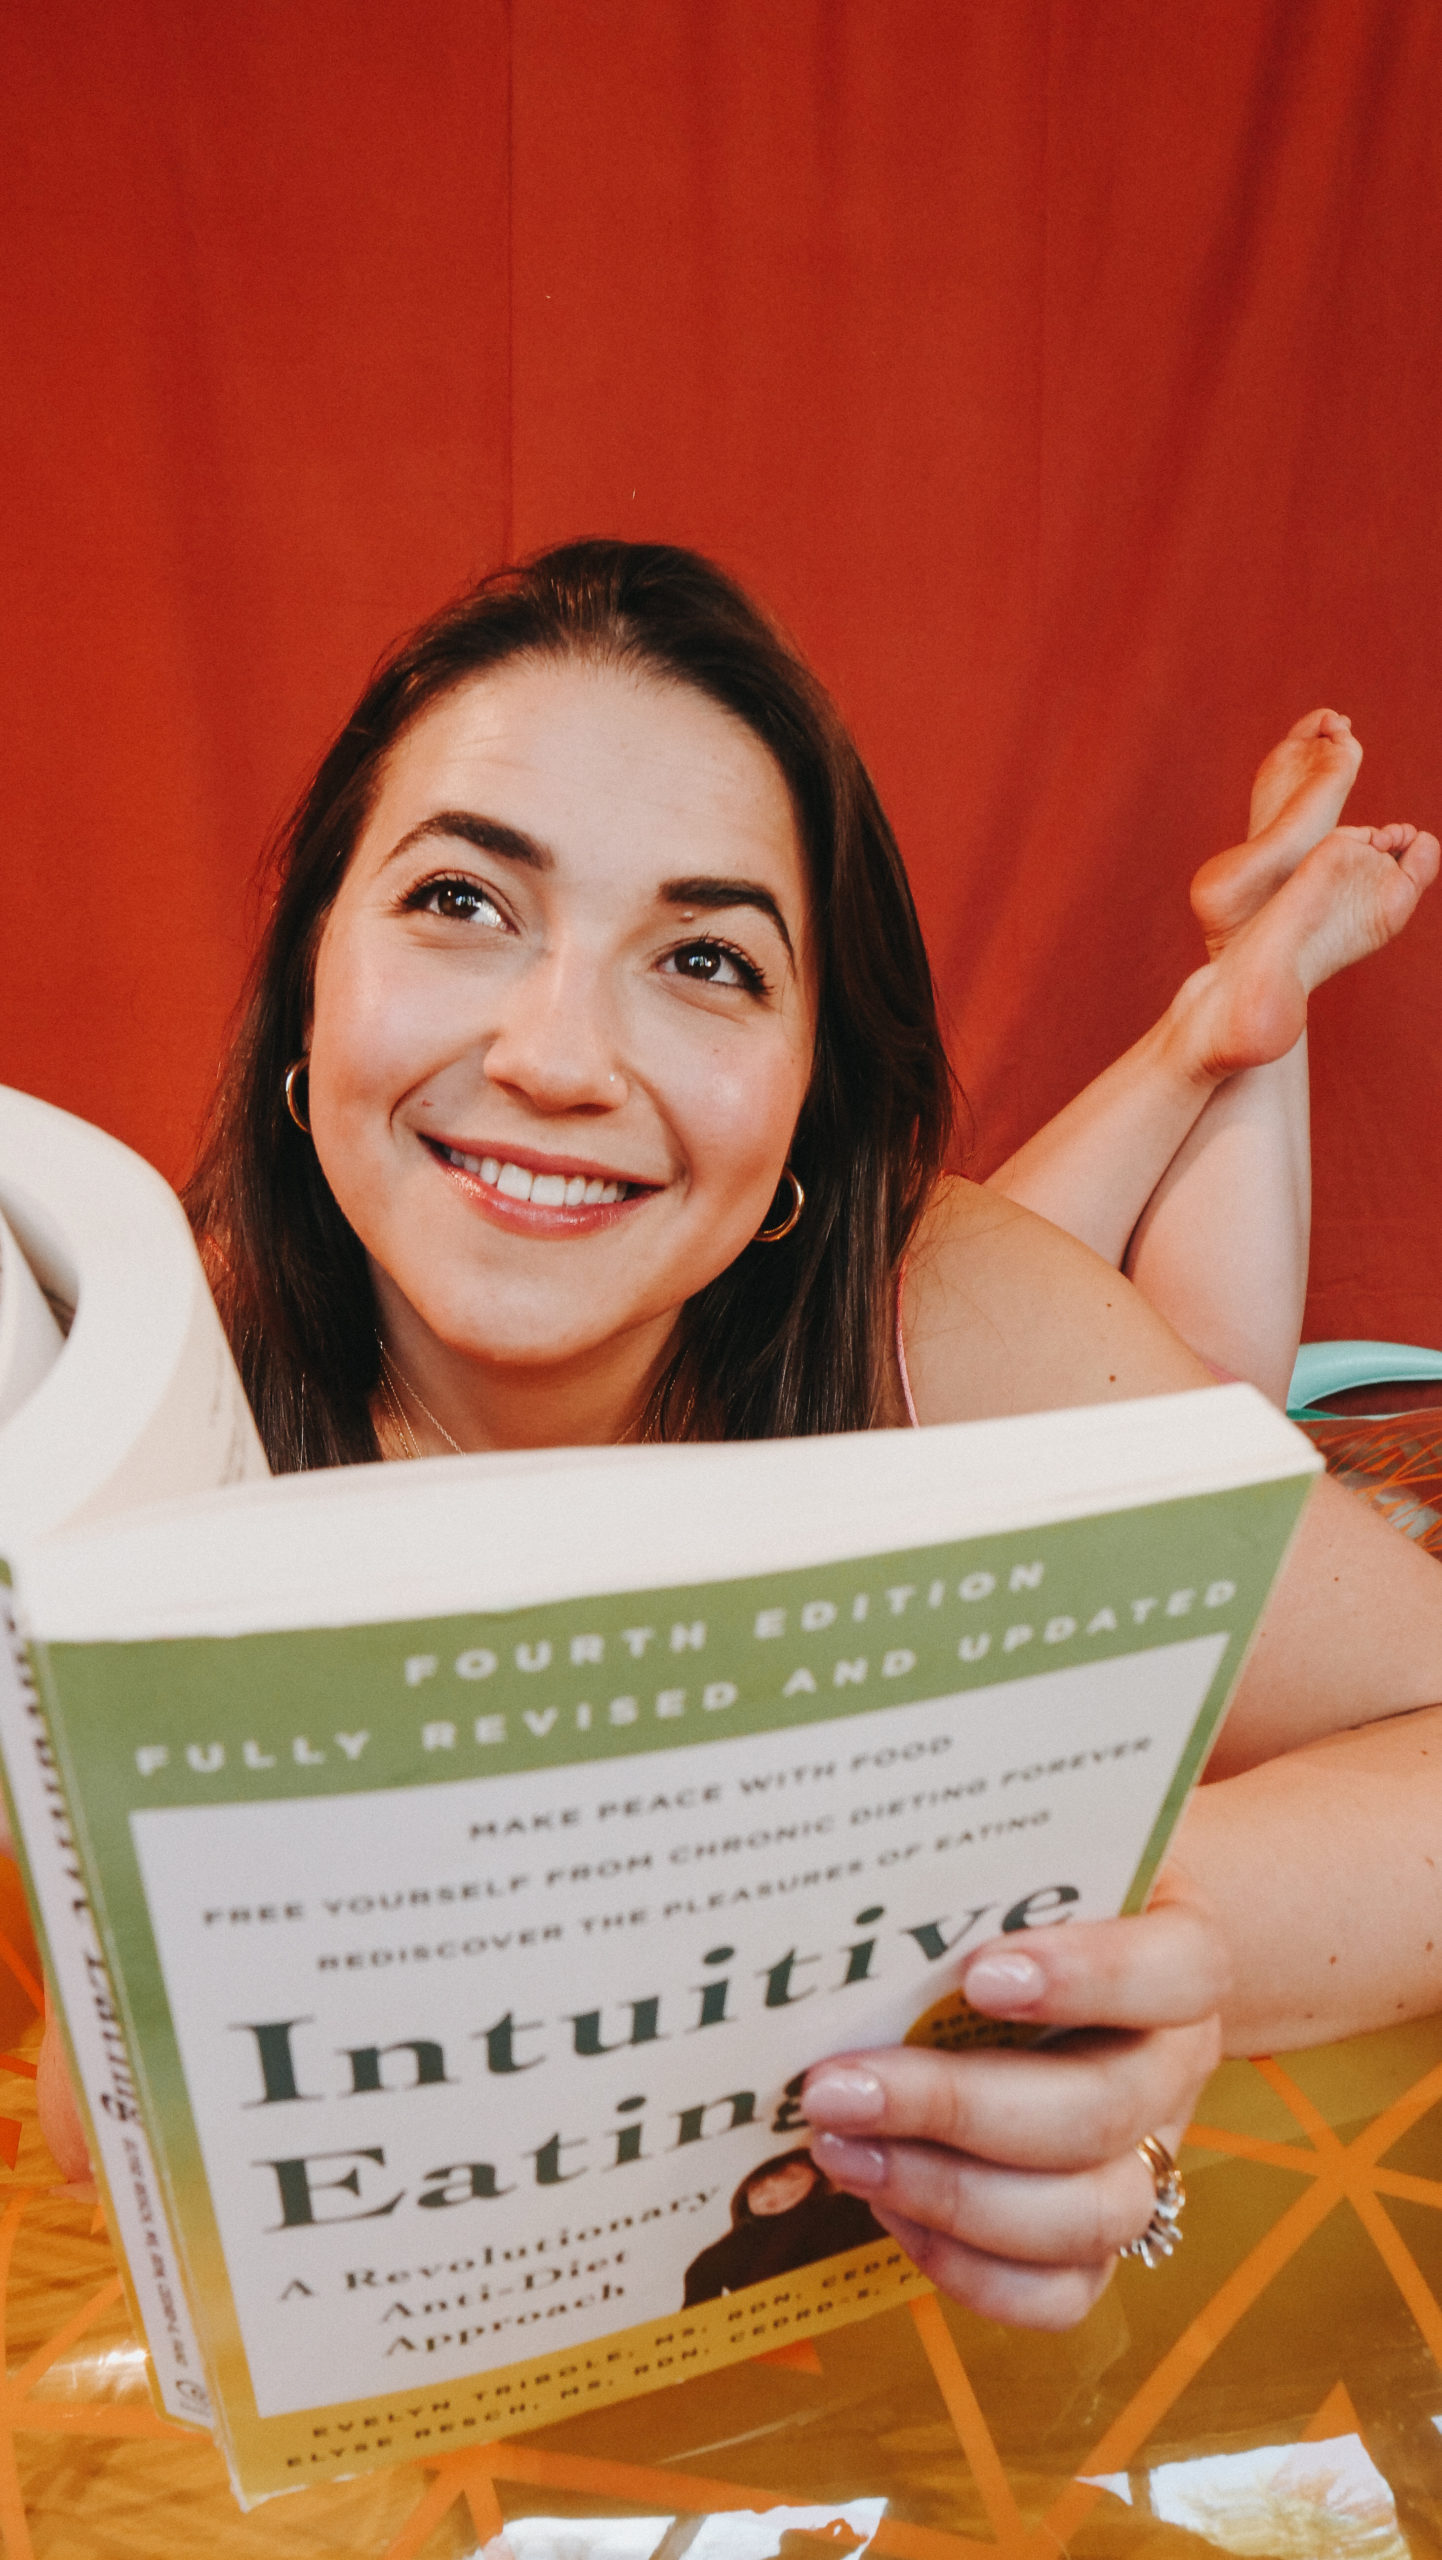 This is a picture of Alexandra thoughtfully reading Intuitive Eating by Elise Resch and Evelyn Tribole. She is getting ready to have a "Hot Girl Summer" exactly as she is, no changes necessary.